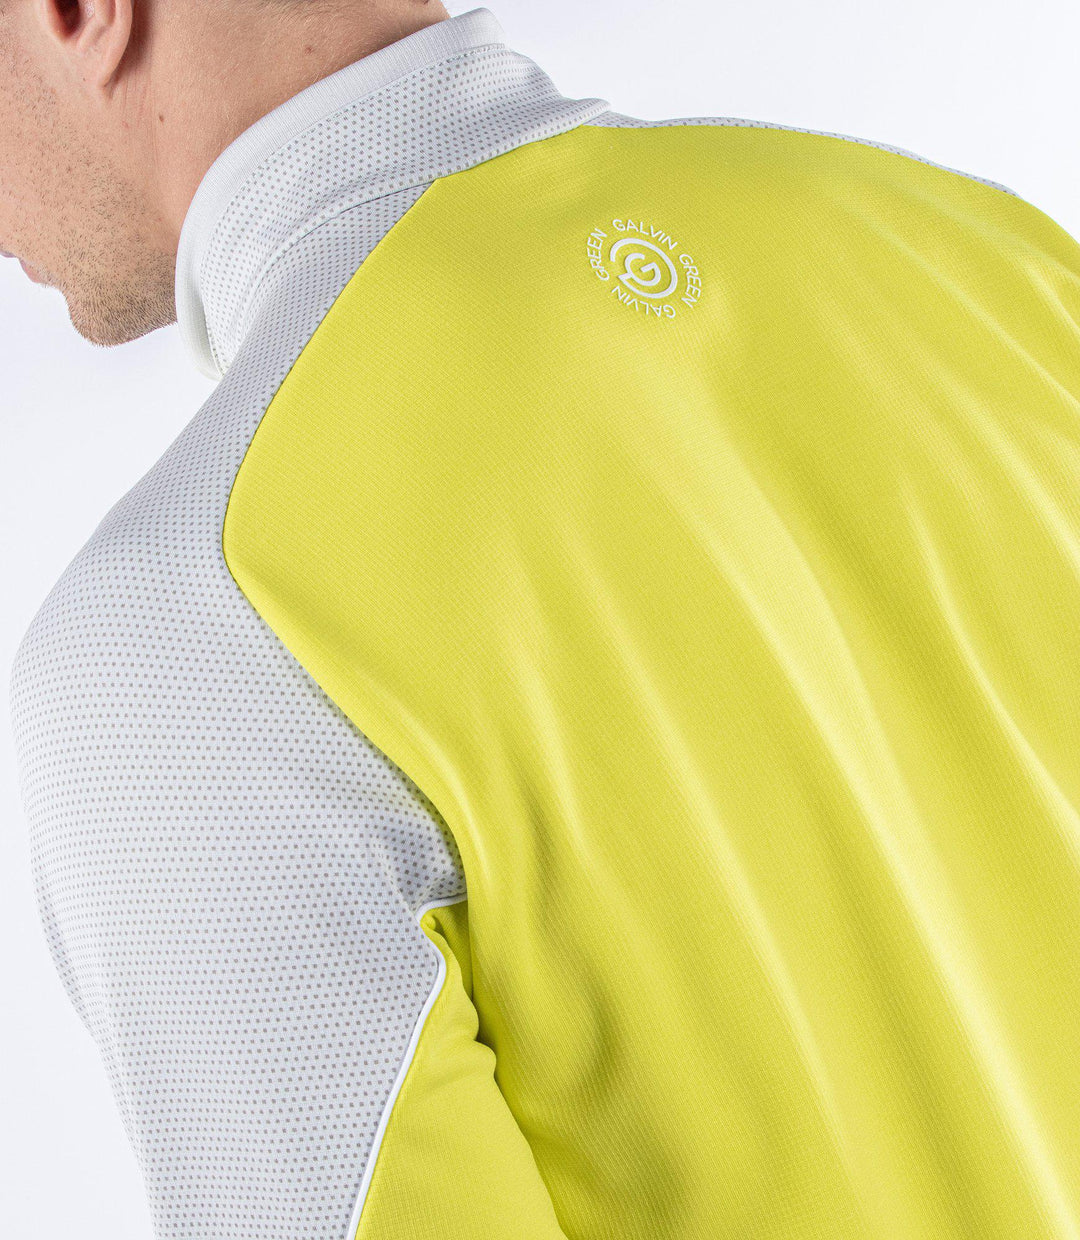 Daxton is a Insulating golf mid layer for Men in the color Sunny Lime/Cool Grey/White(7)